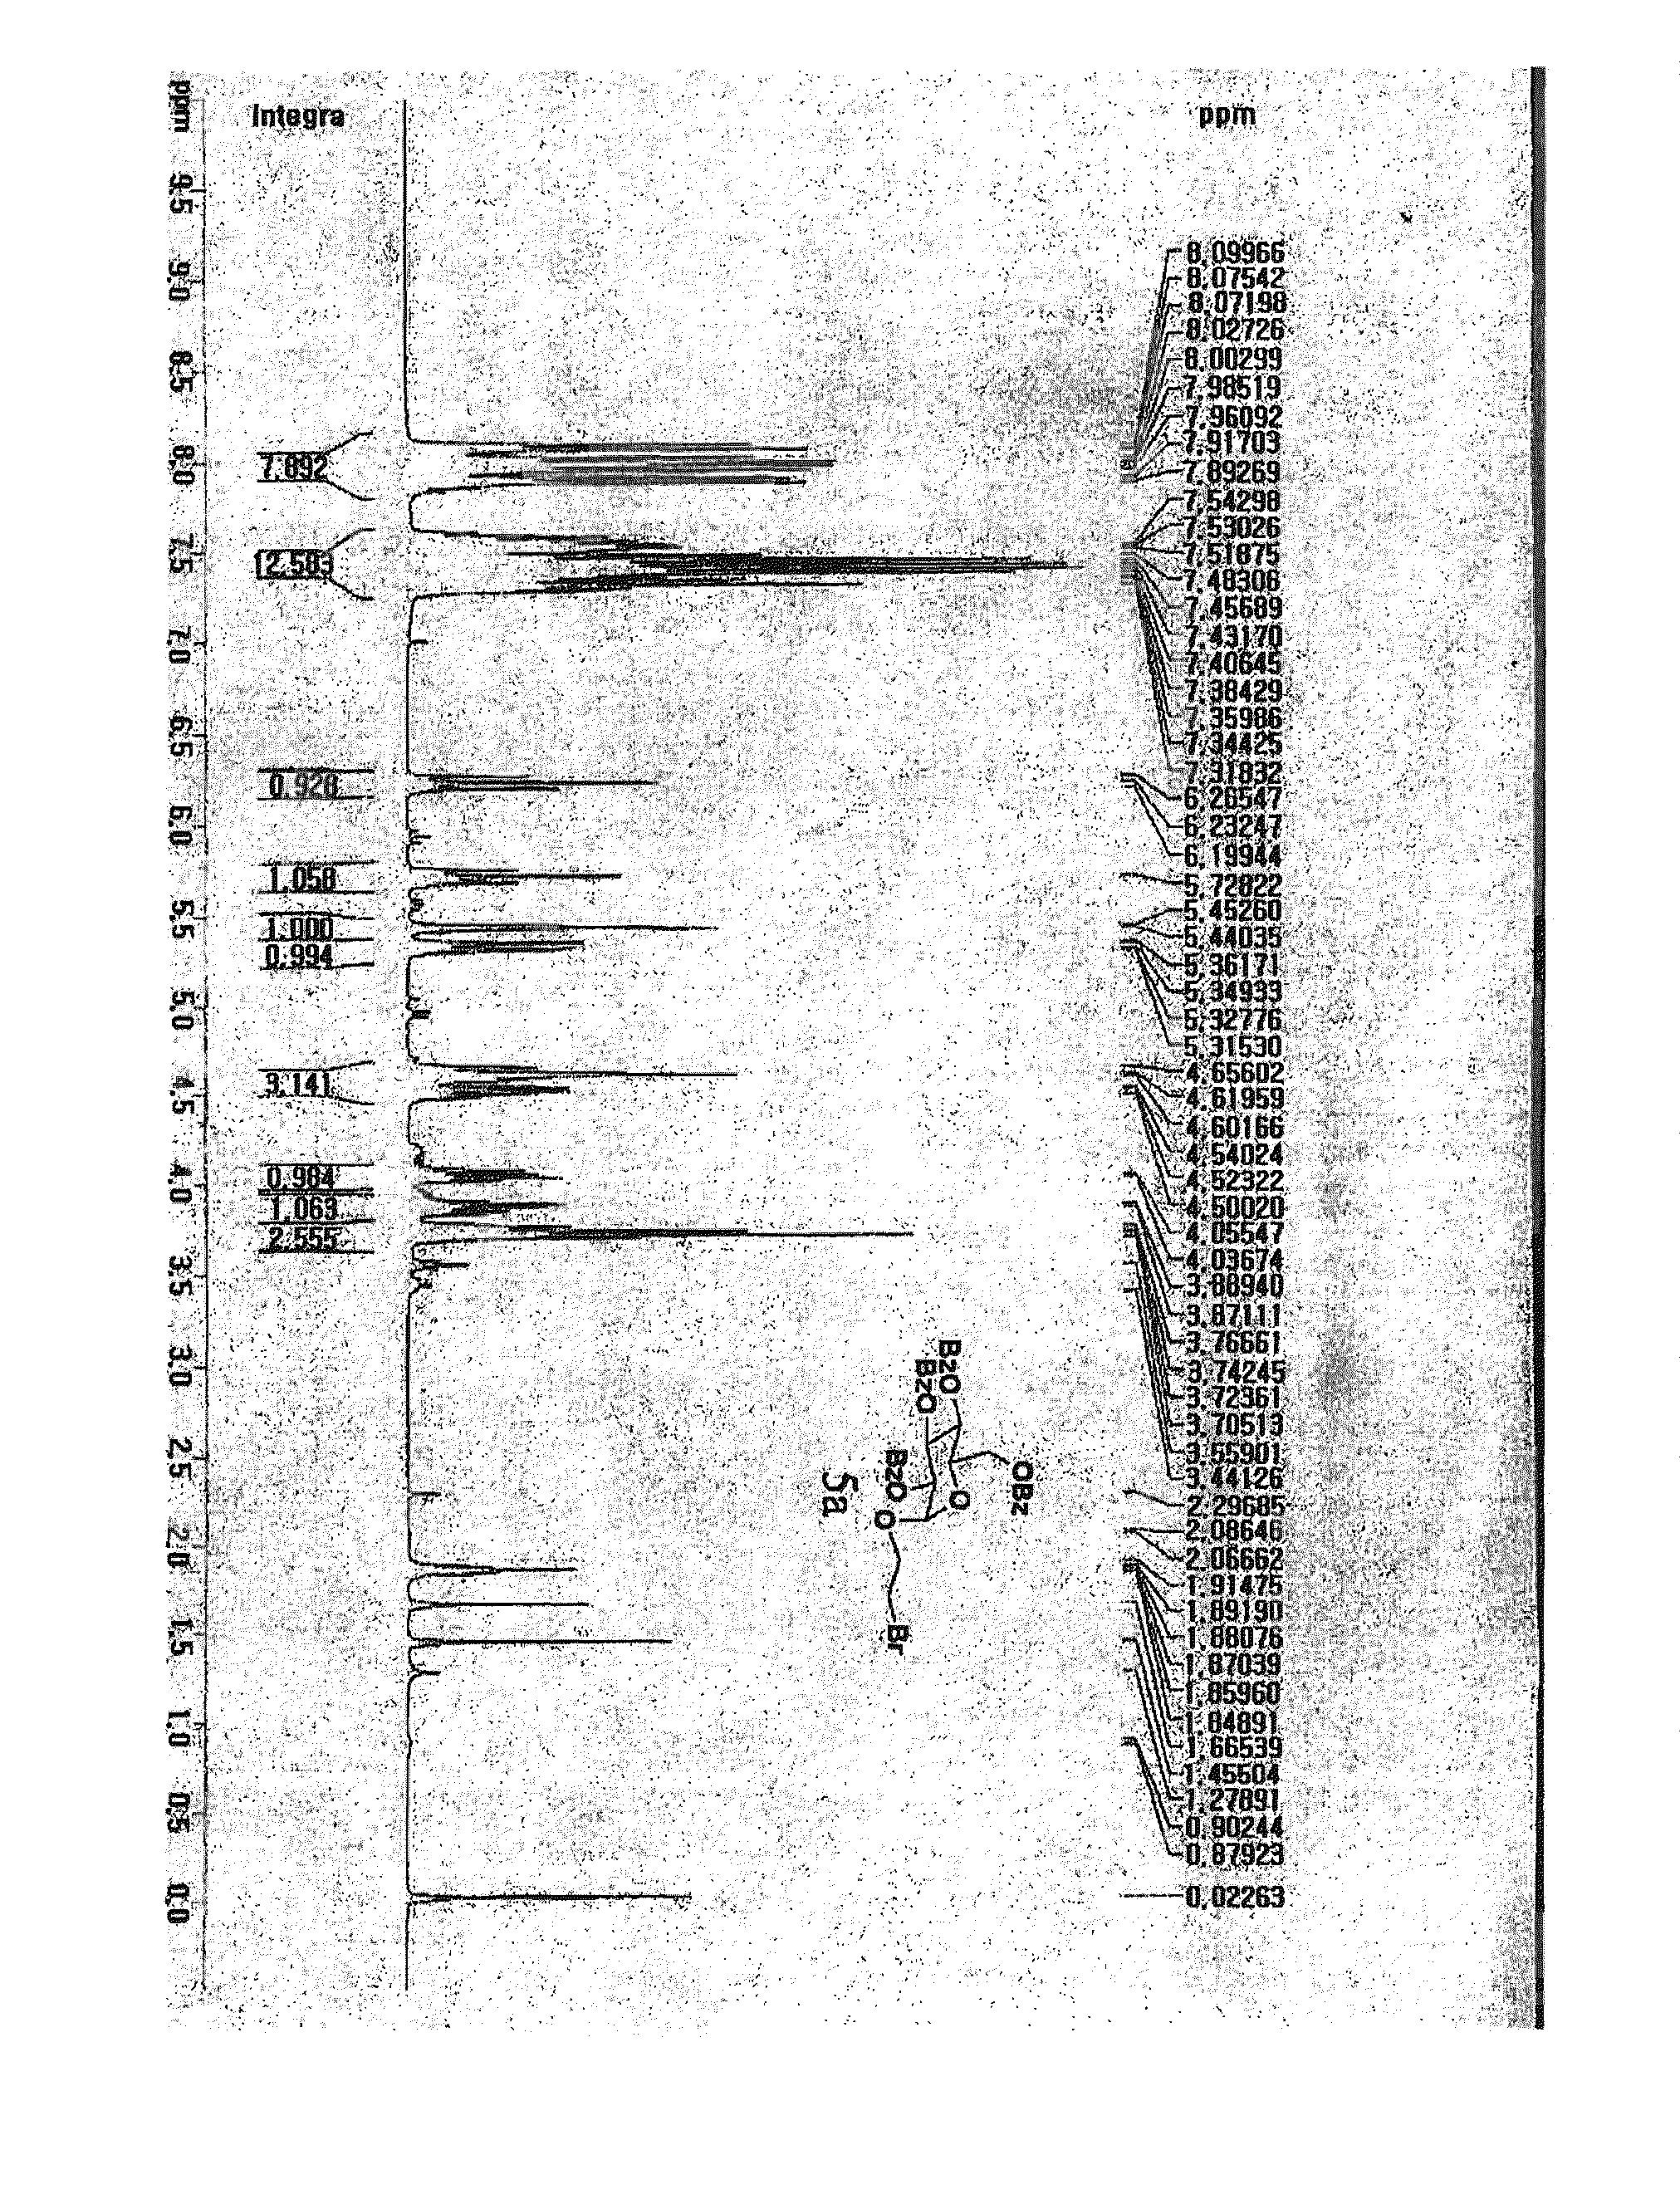 Fluorescent dye-labeled glucose bioprobe, synthesis method and usage thereof